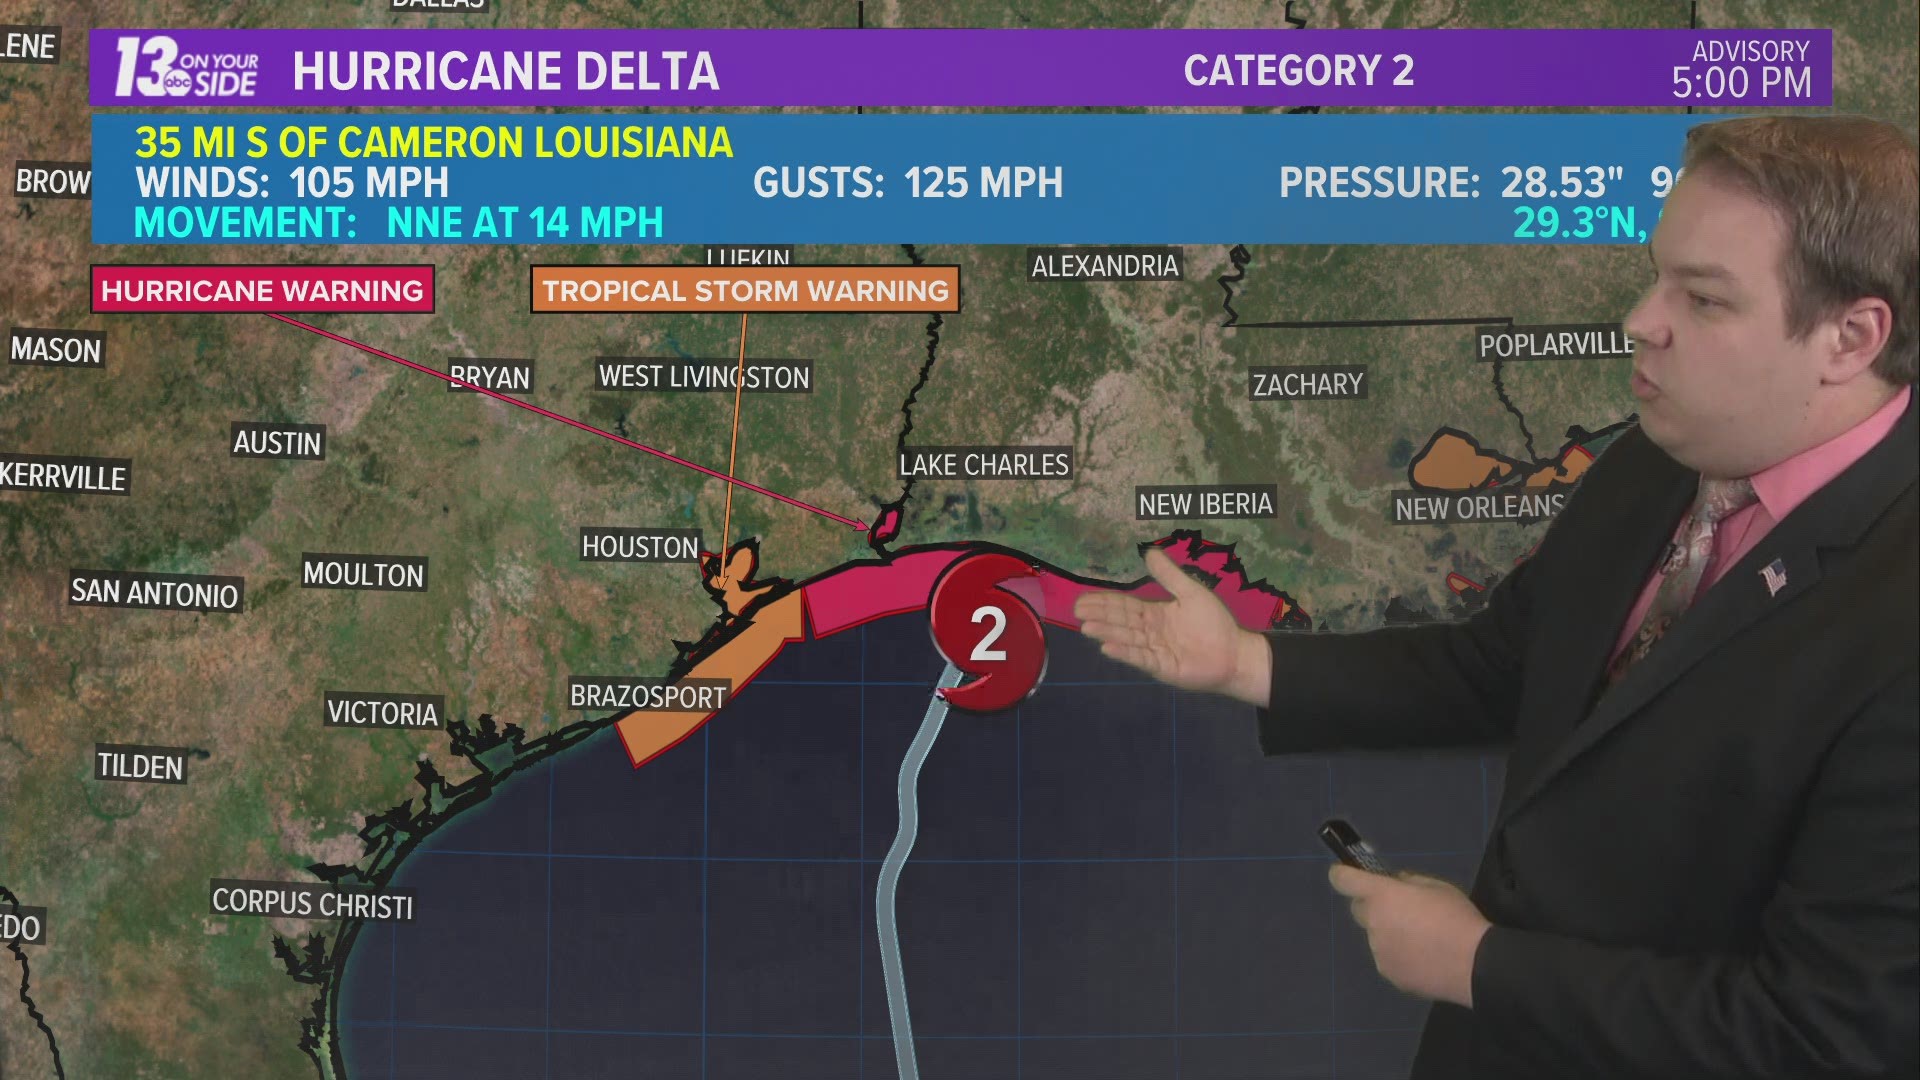 Hurricane Delta will make landfall in southern Louisiana in the coming hours. 13 On Your Side has you covered with the latest!